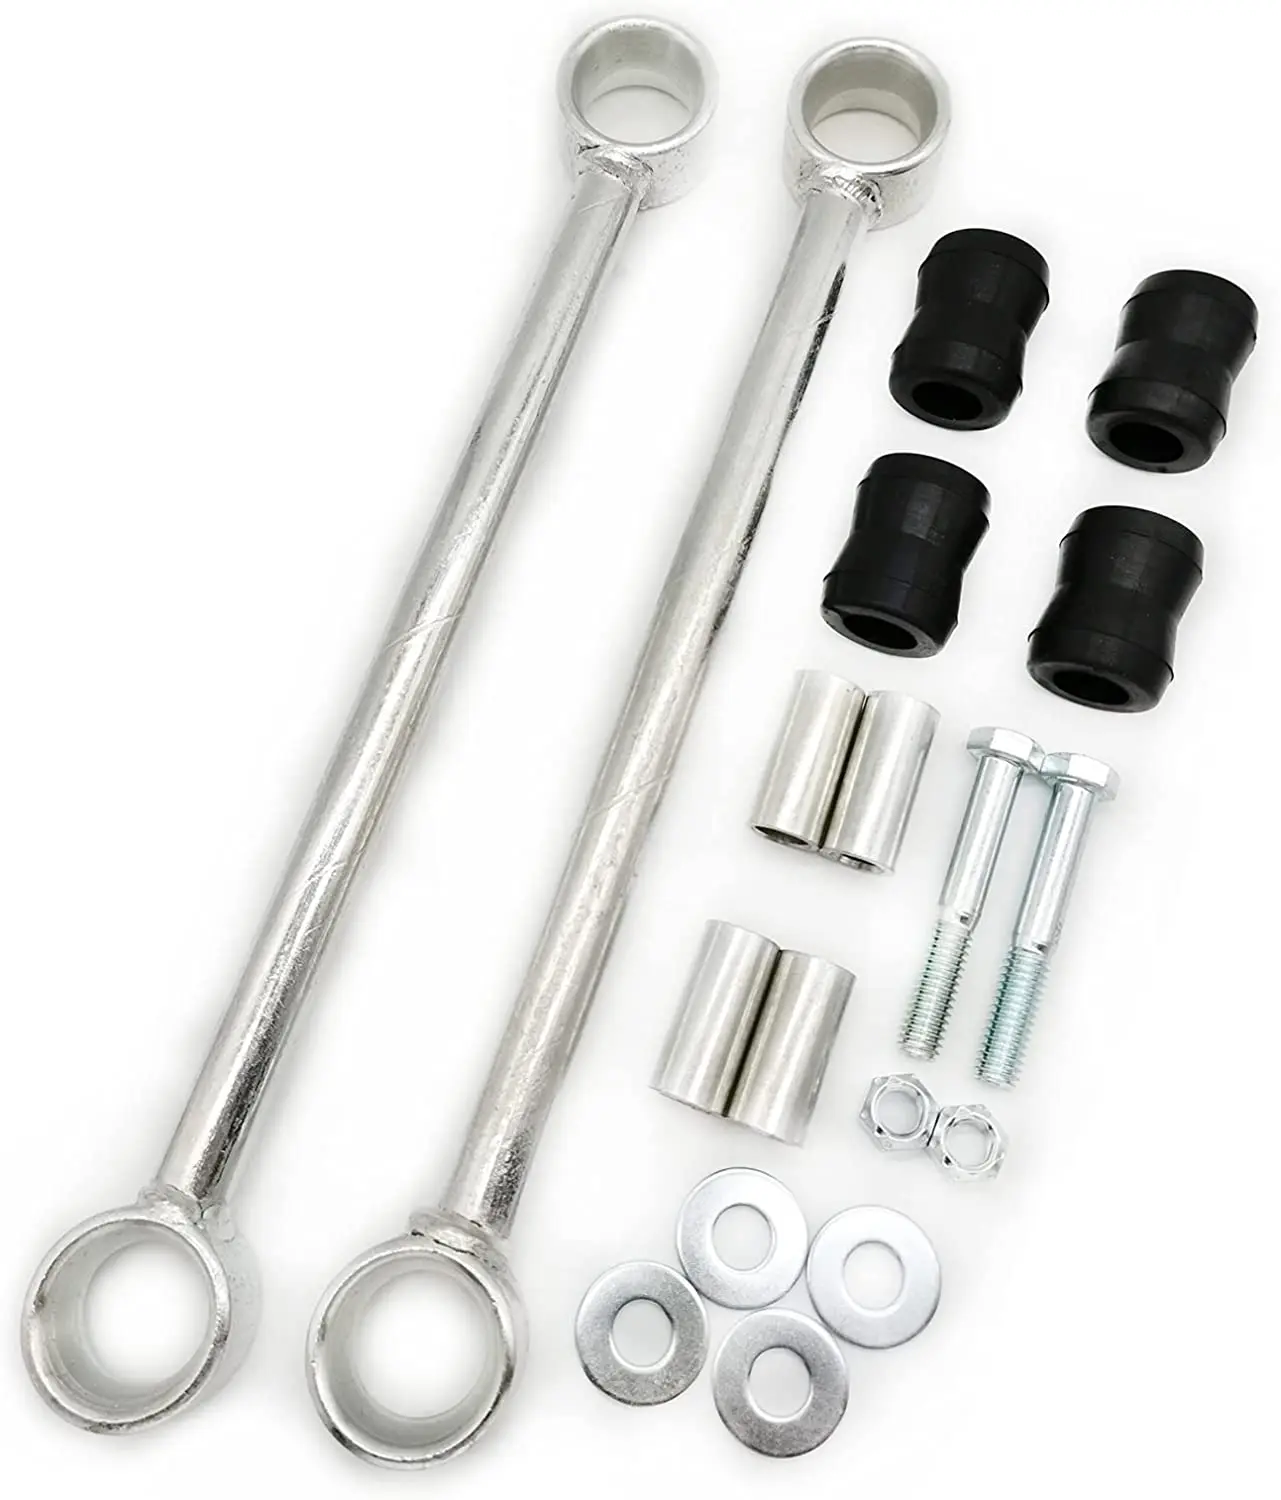 Rear Suspension Bolts & Nuts Kit for Grand Cherokee WJ 1999-2004